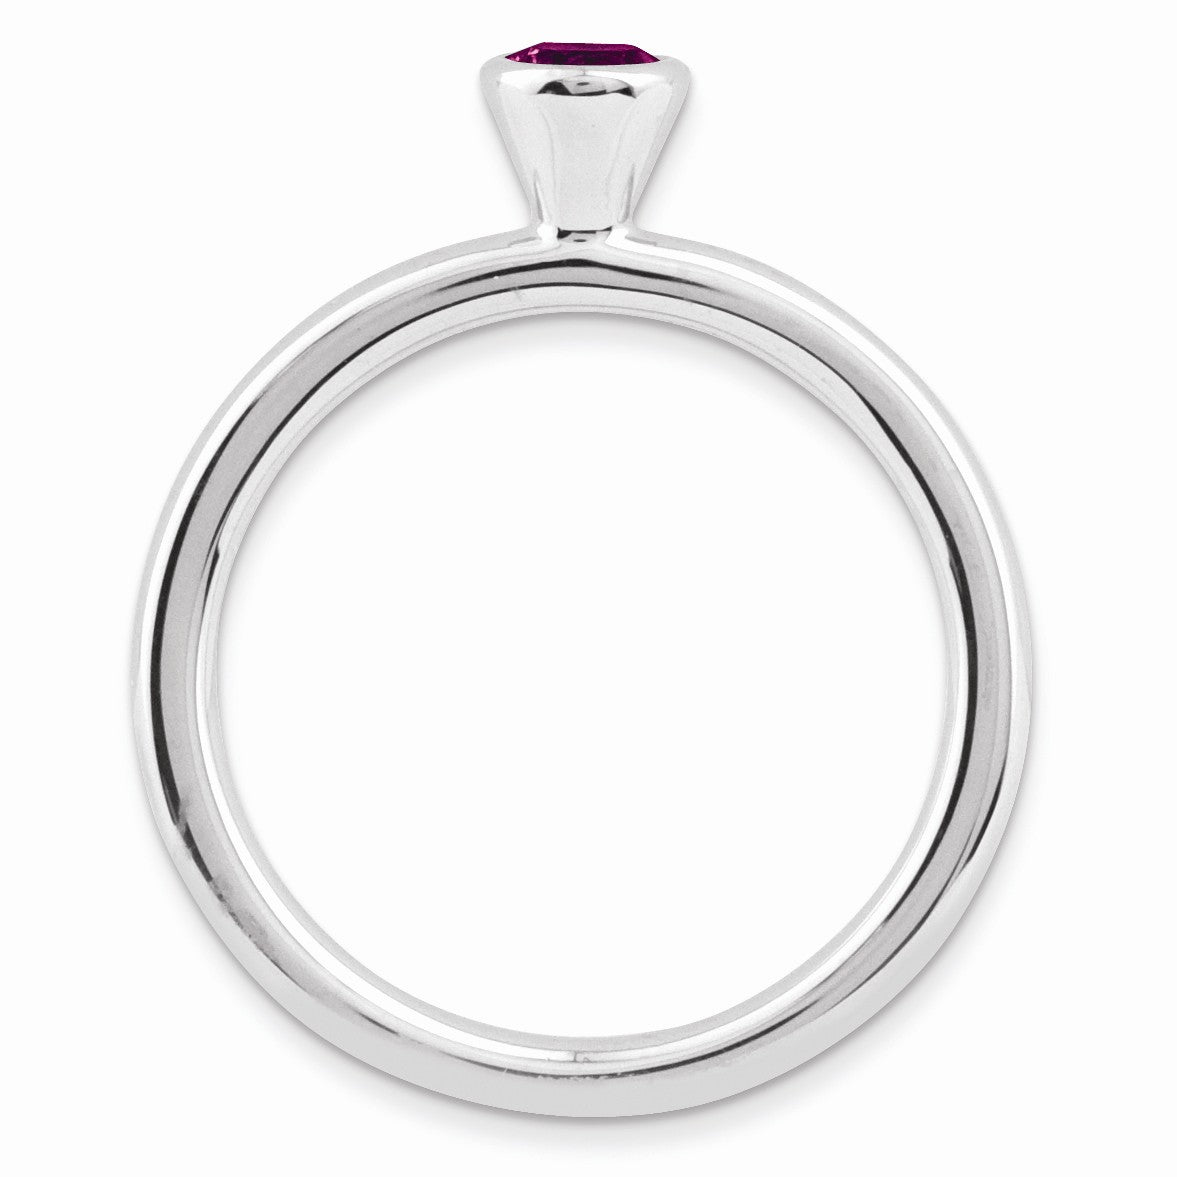 Alternate view of the Stackable High Profile 4mm Rhodolite Garnet Silver Ring by The Black Bow Jewelry Co.